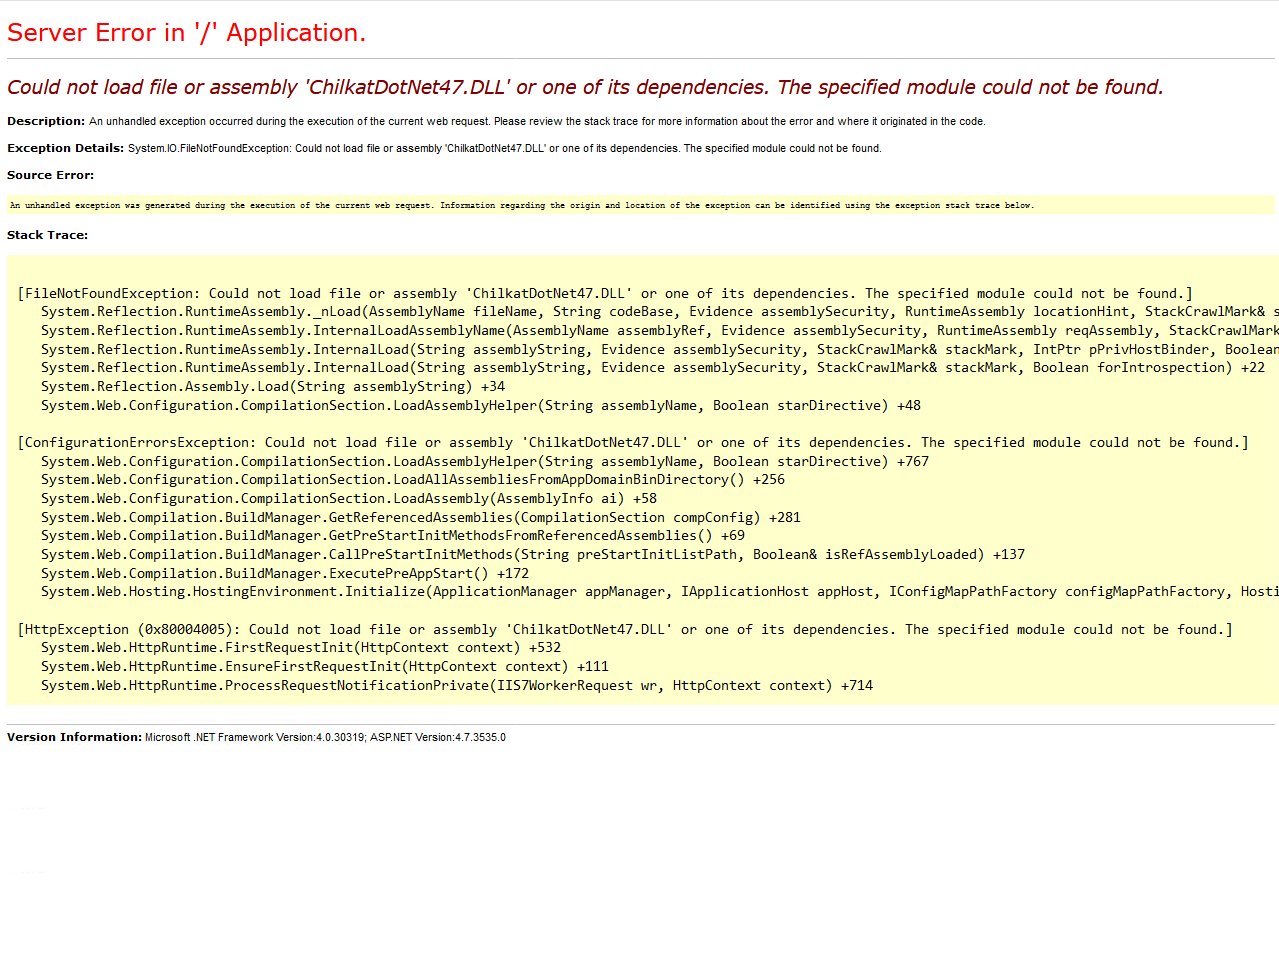 Could not load assembly ChilkatDotNet47.DLL